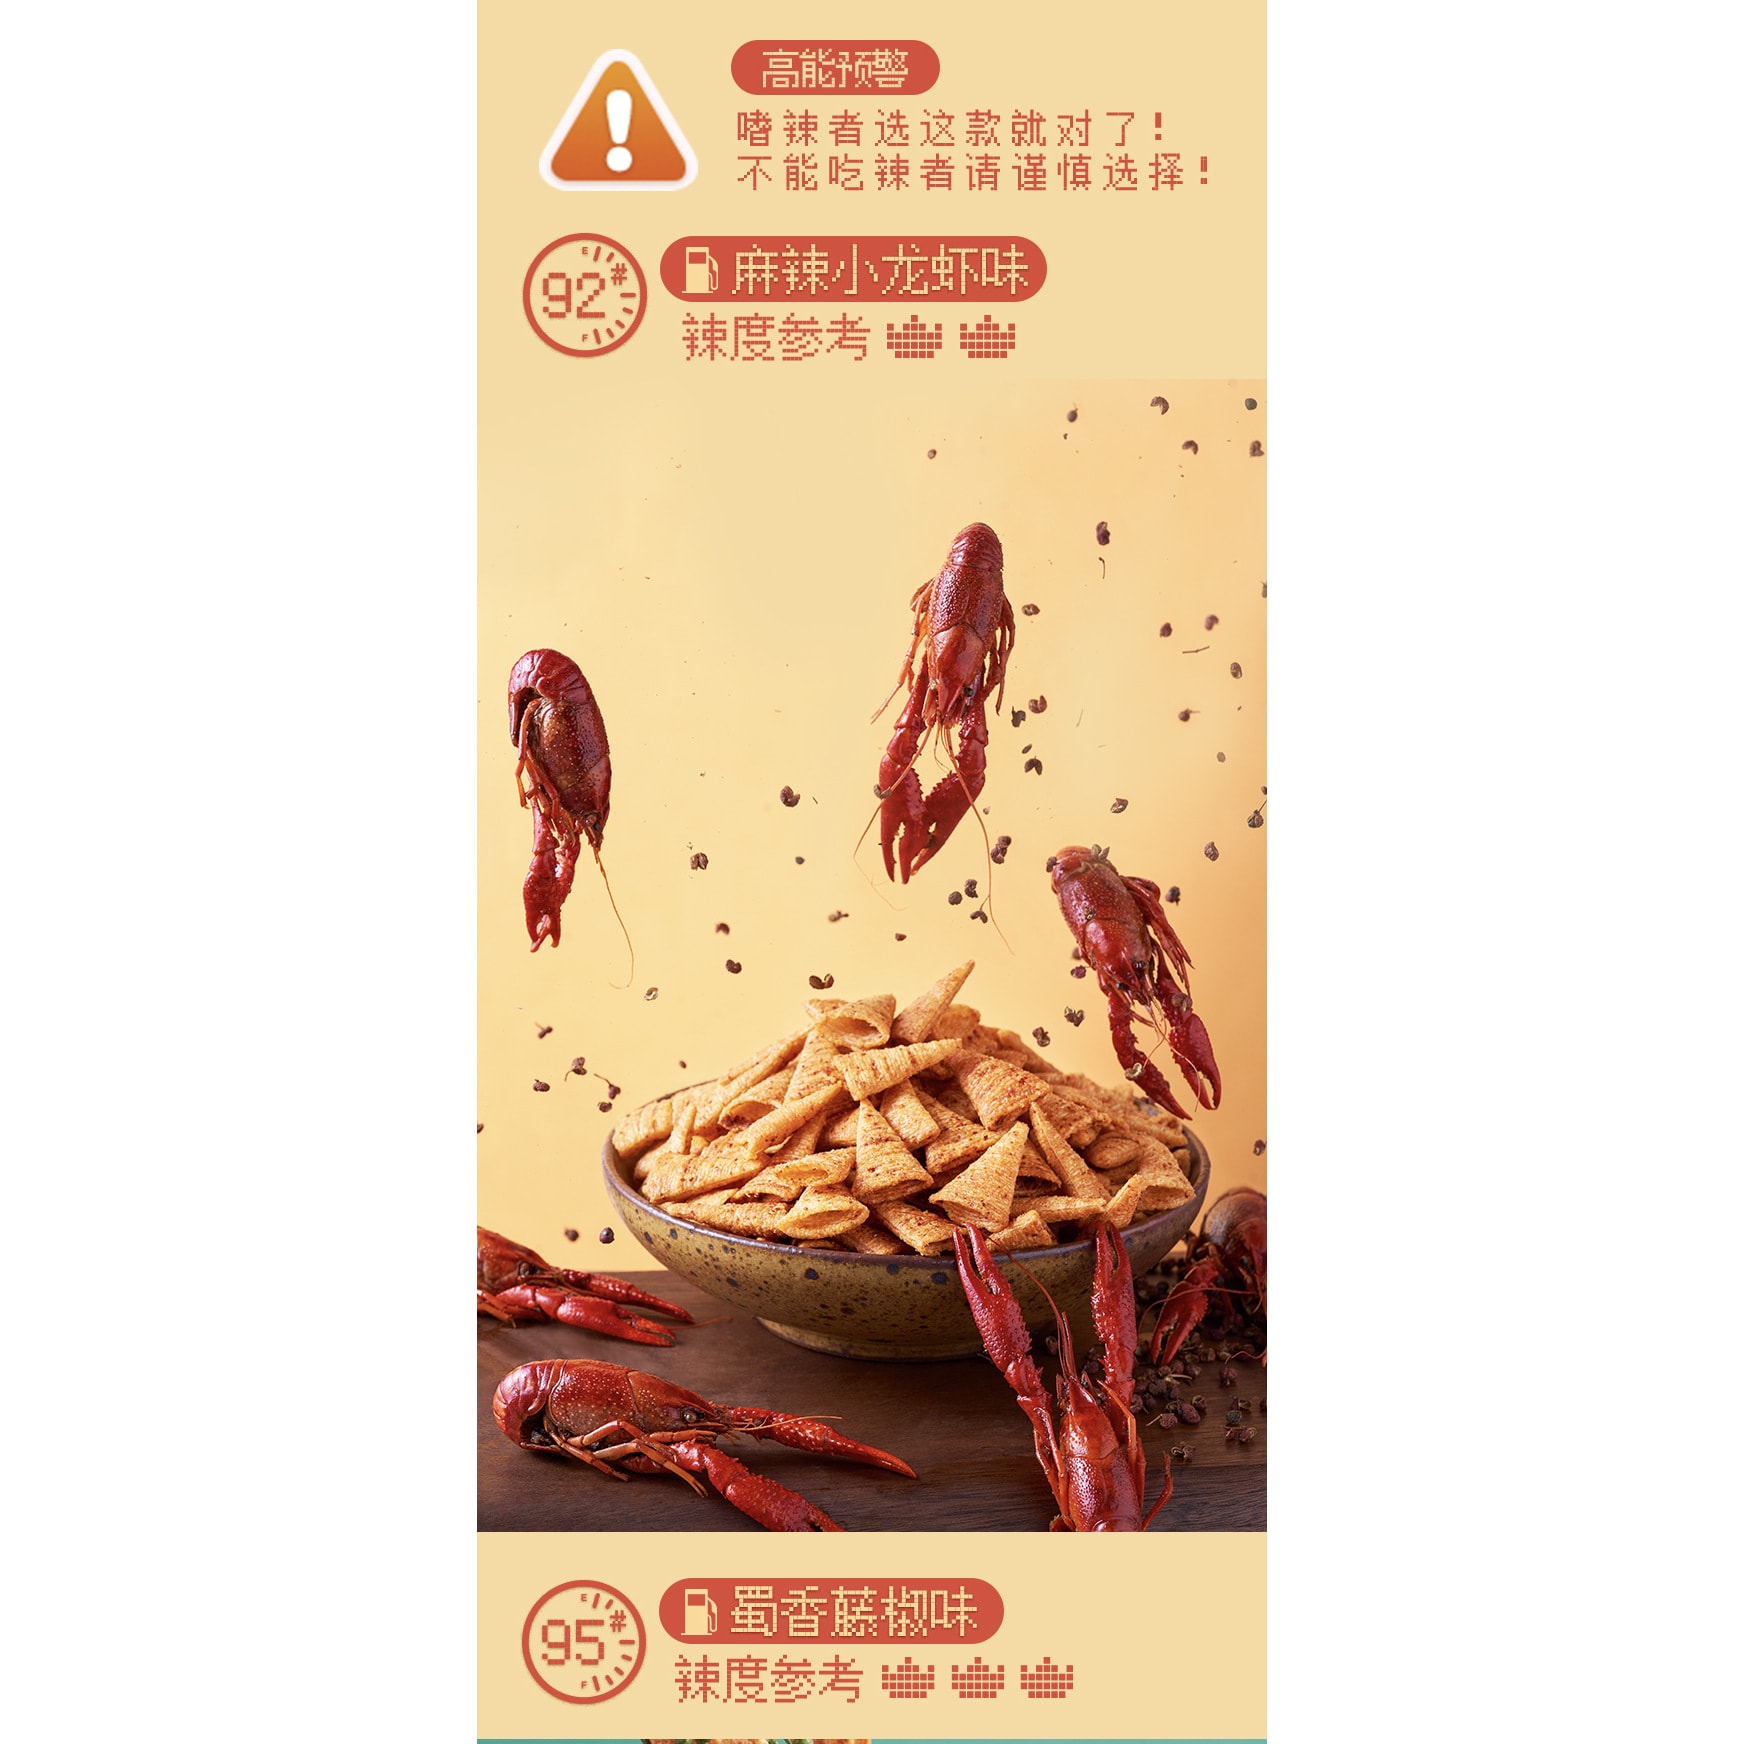 Spicy crayfish flavored puffed food 108g